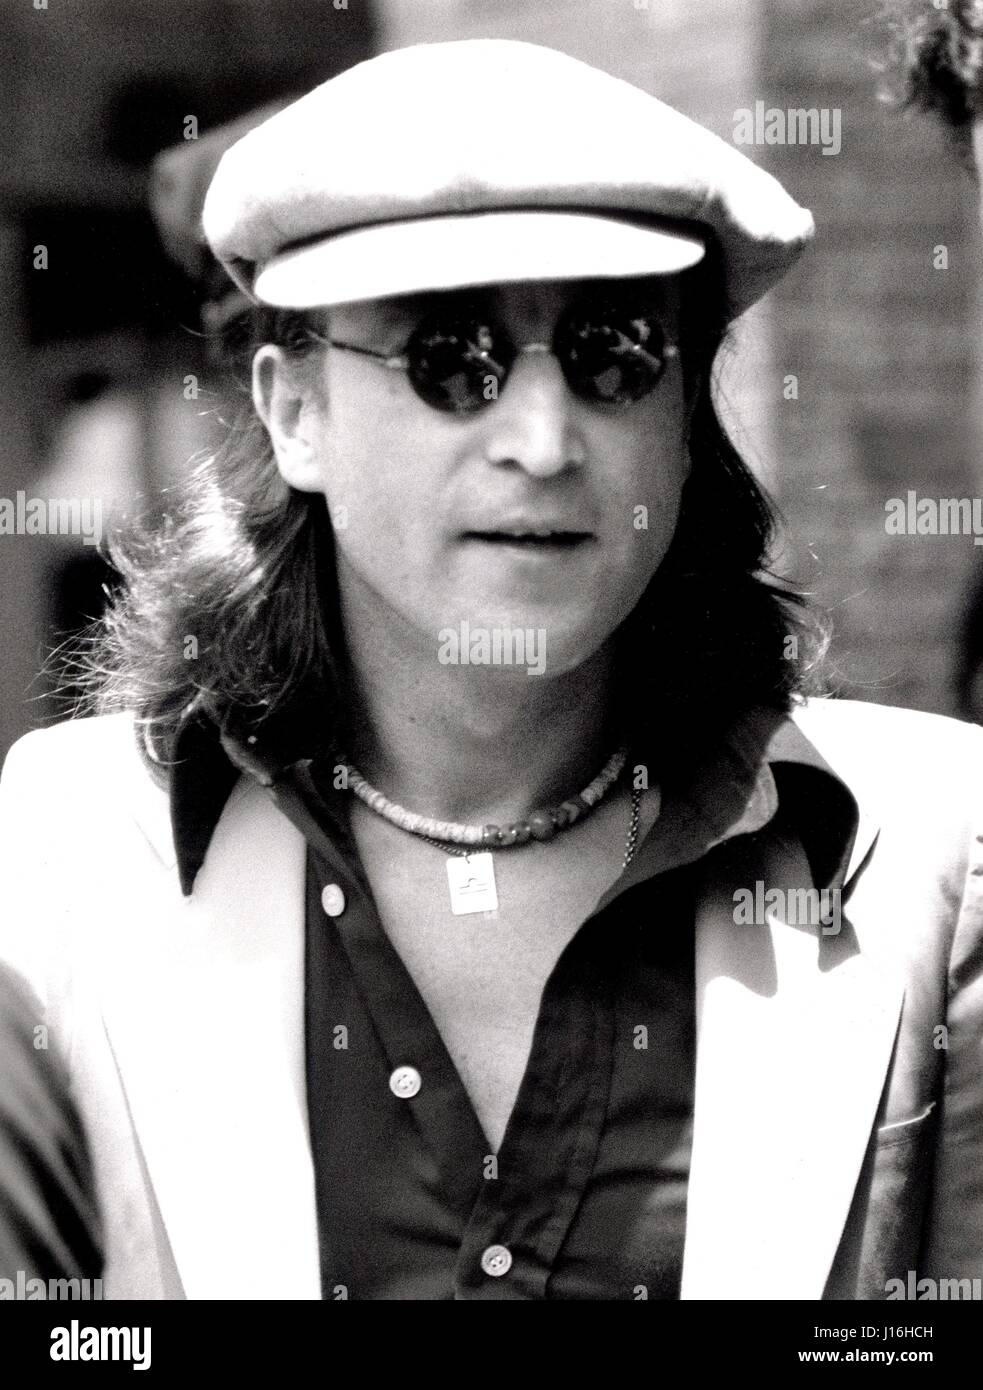 John Lennon photographed in the mid 1970's.  © Scott Weiner // MediaPunch Credit all Uses Stock Photo